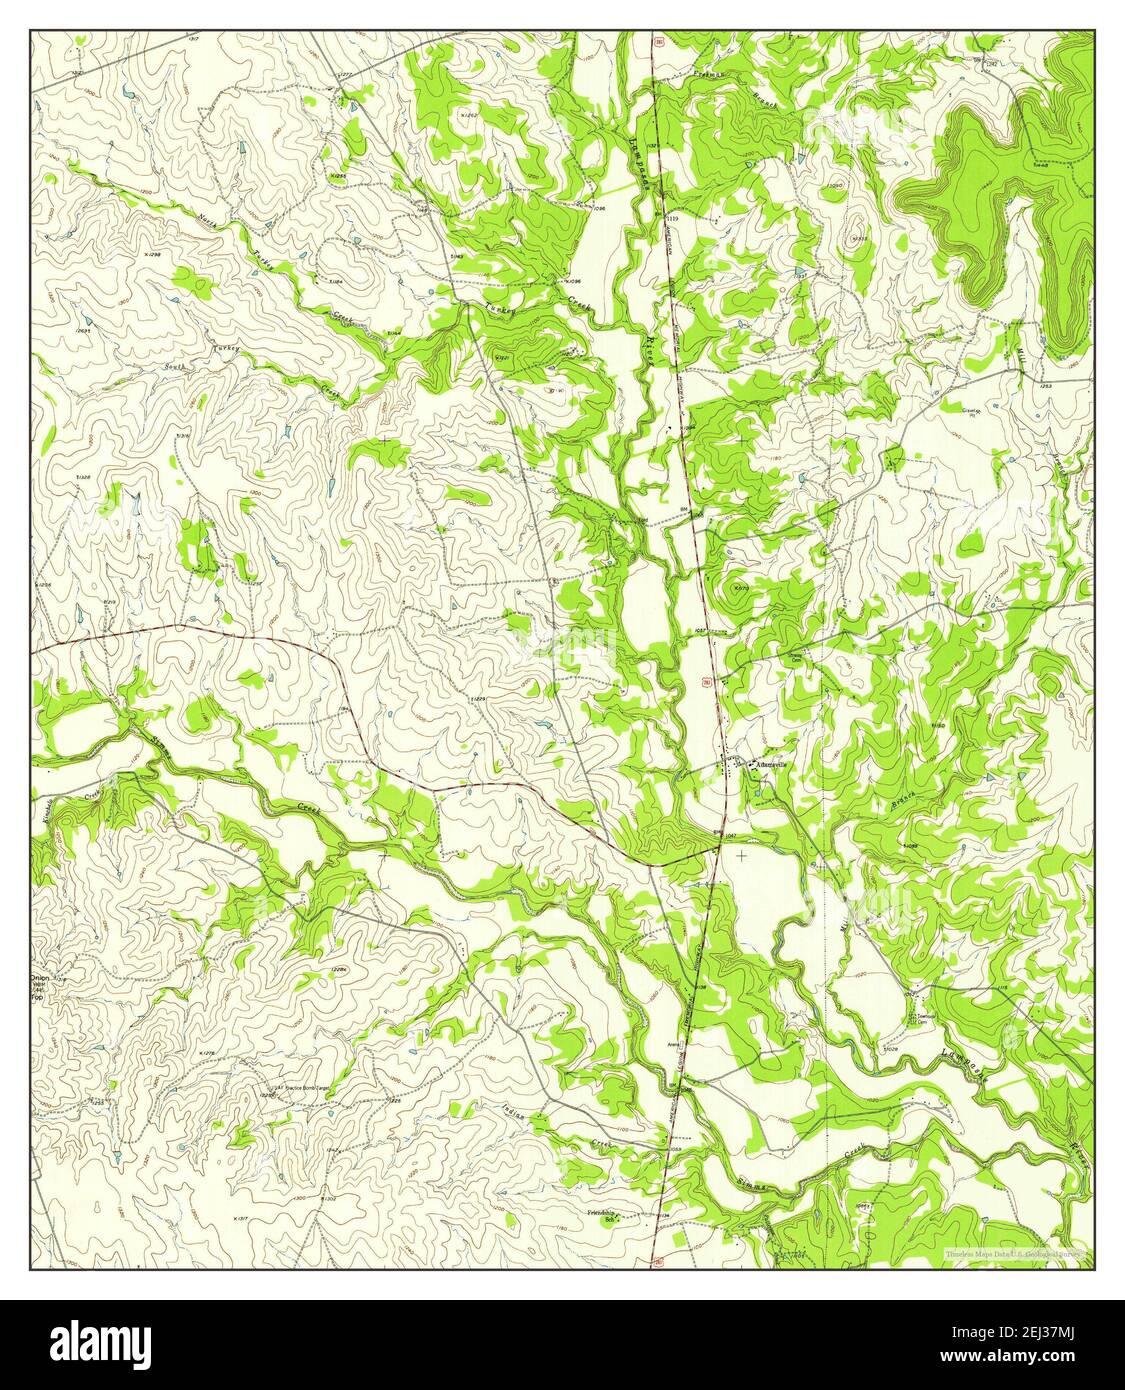 Adamsville, Texas, map 1954, 1:24000, United States of America by Timeless Maps, data U.S. Geological Survey Stock Photo